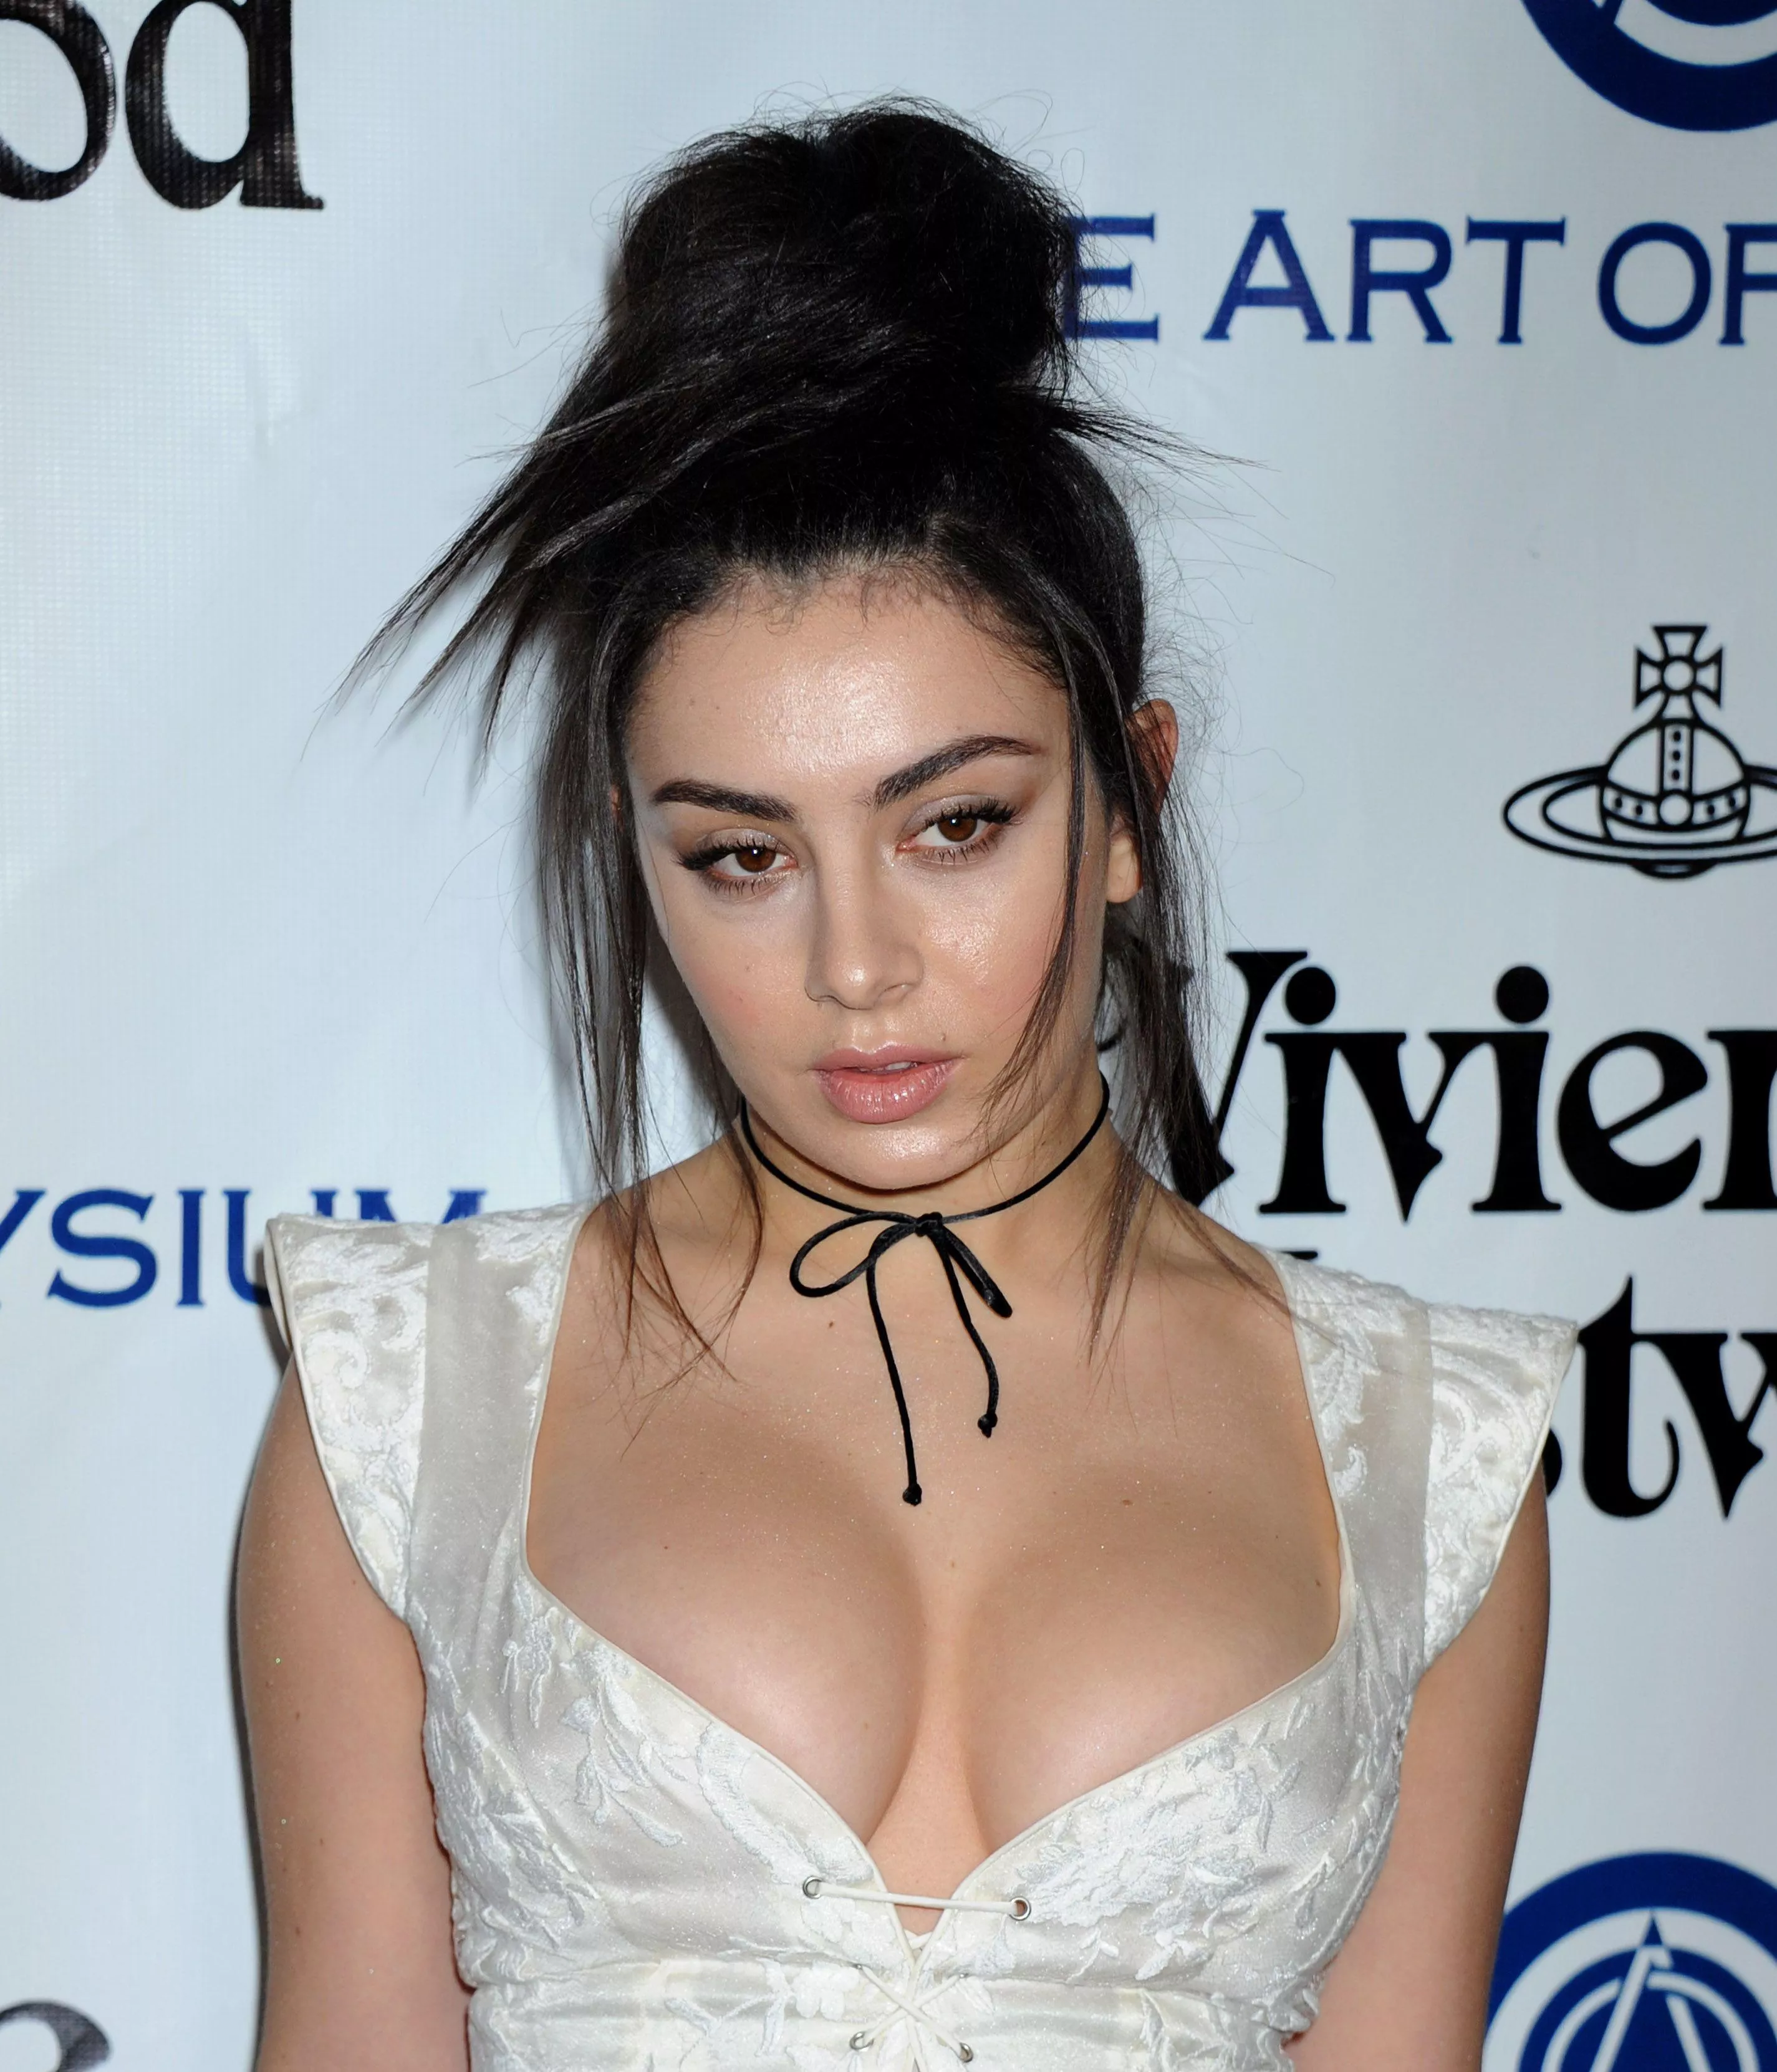 Www Xcx Porn - Charli xcx nude porn picture | Nudeporn.org